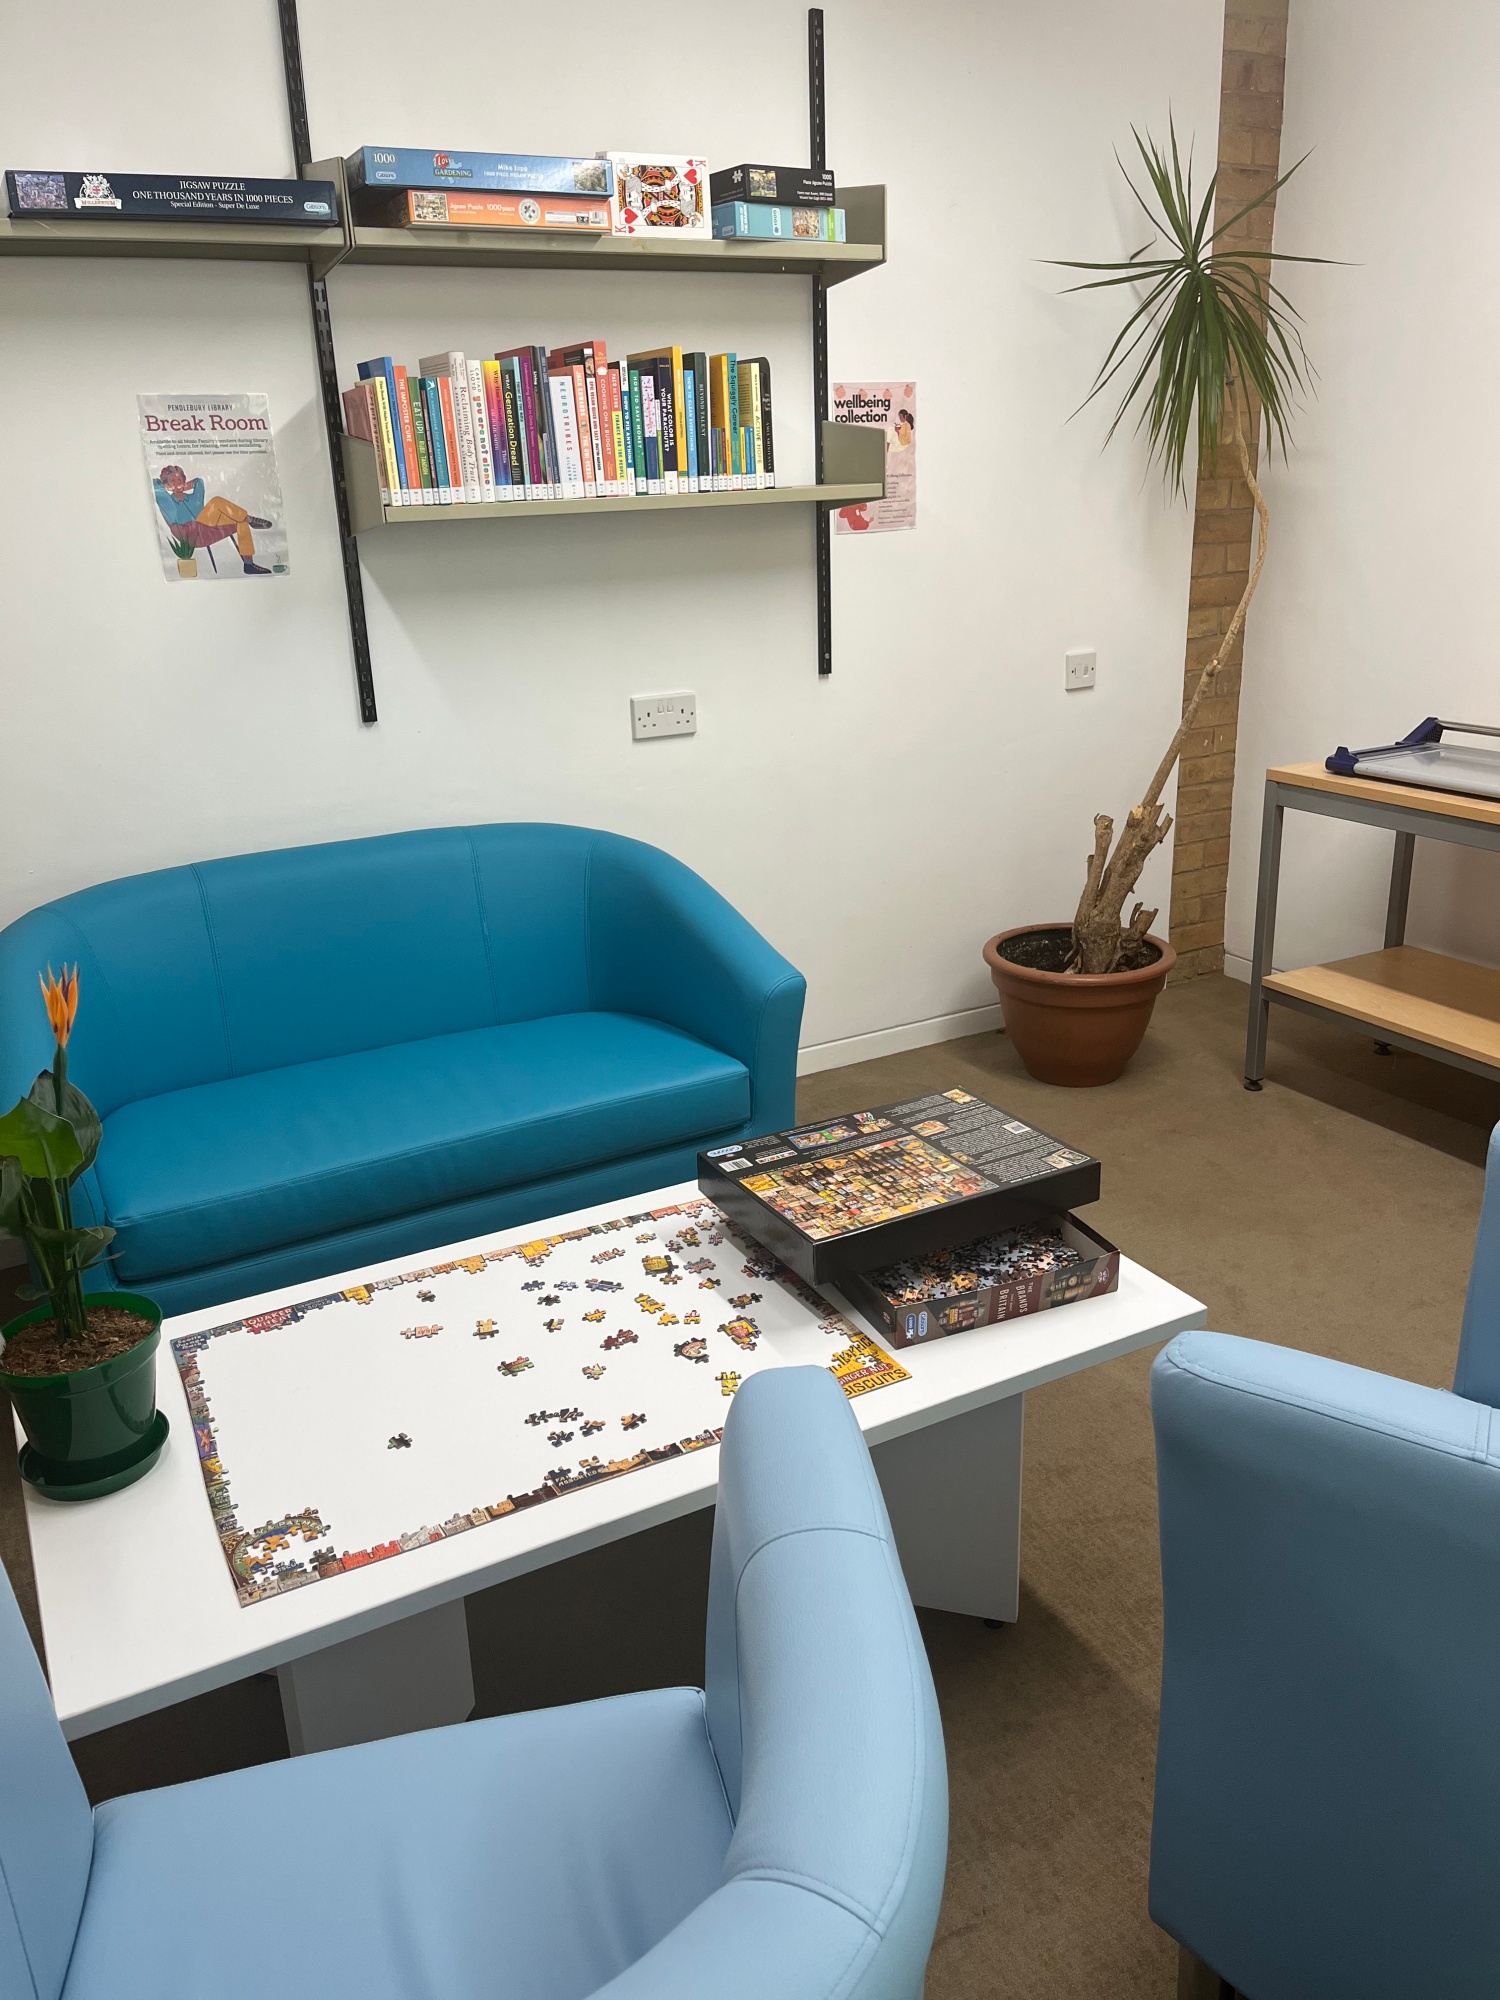 Photograph of library break room, featuring two pale blue arm chairs opposite a medium blue sofa, There is a white coffee table in between, with an unfinished puzzle and a potted plant on top. On the wall behind there is a shelf with books and board games. To the left is a large potted plant.